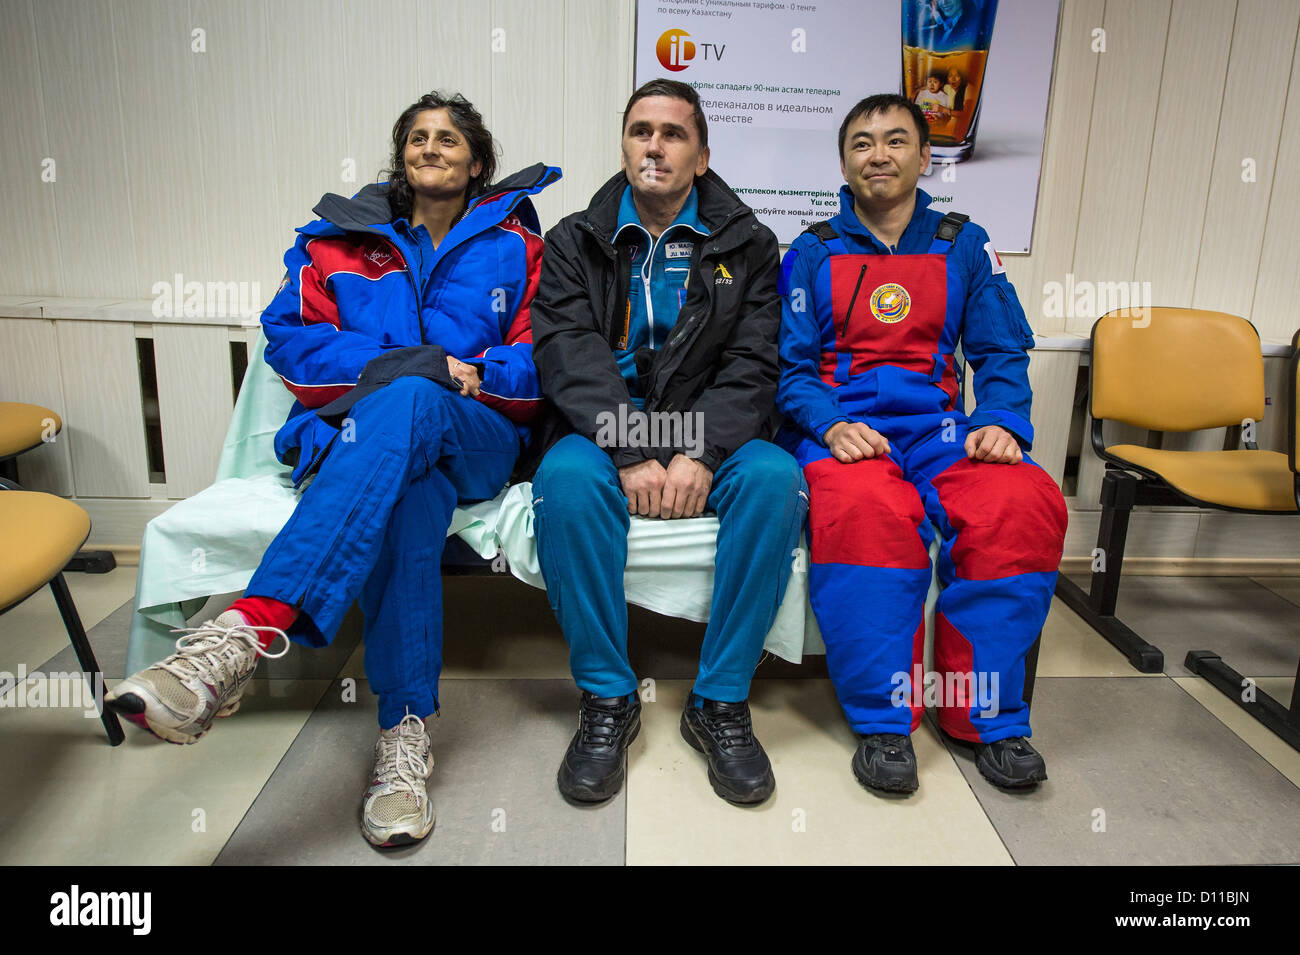 Expedition 33 crew members Commander Sunita Williams of NASA, Flight Engineers Yuri Malenchenko of ROSCOSMOS (Russian Federal Space Agency) and Akihiko Hoshide of JAXA (Japan Aerospace Exploration Agency) smile for photos at the Kustanay Airport in Kazakhstan a few hours after they landed their Soyuz spacecraft in a remote area outside the town of Arkalyk, Kazakhstan November 19, 2012. Williams, Hoshide and Malenchenko returned from four months onboard the International Space Station. Stock Photo